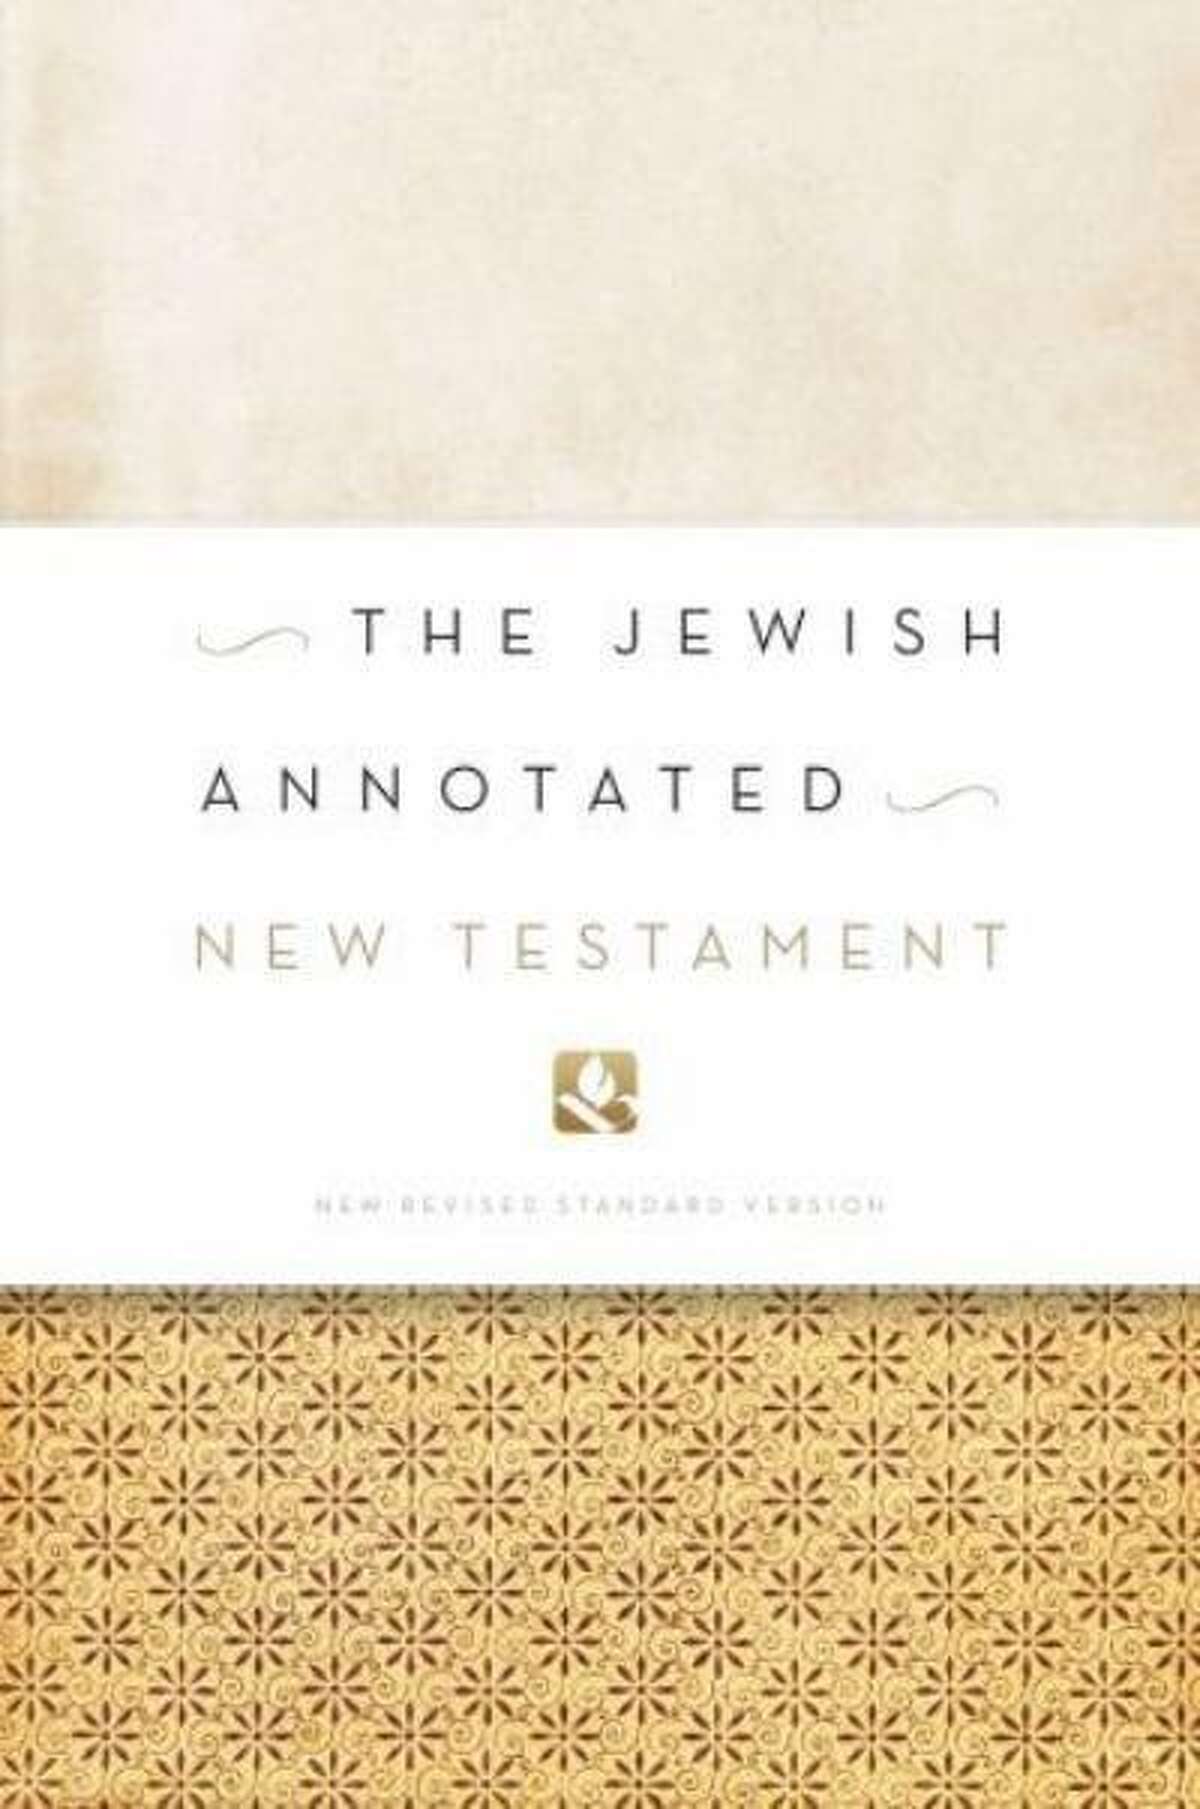 Amy-Jill Levine and Marc Brettler are authors of "The Jewish Annotated New Testament."